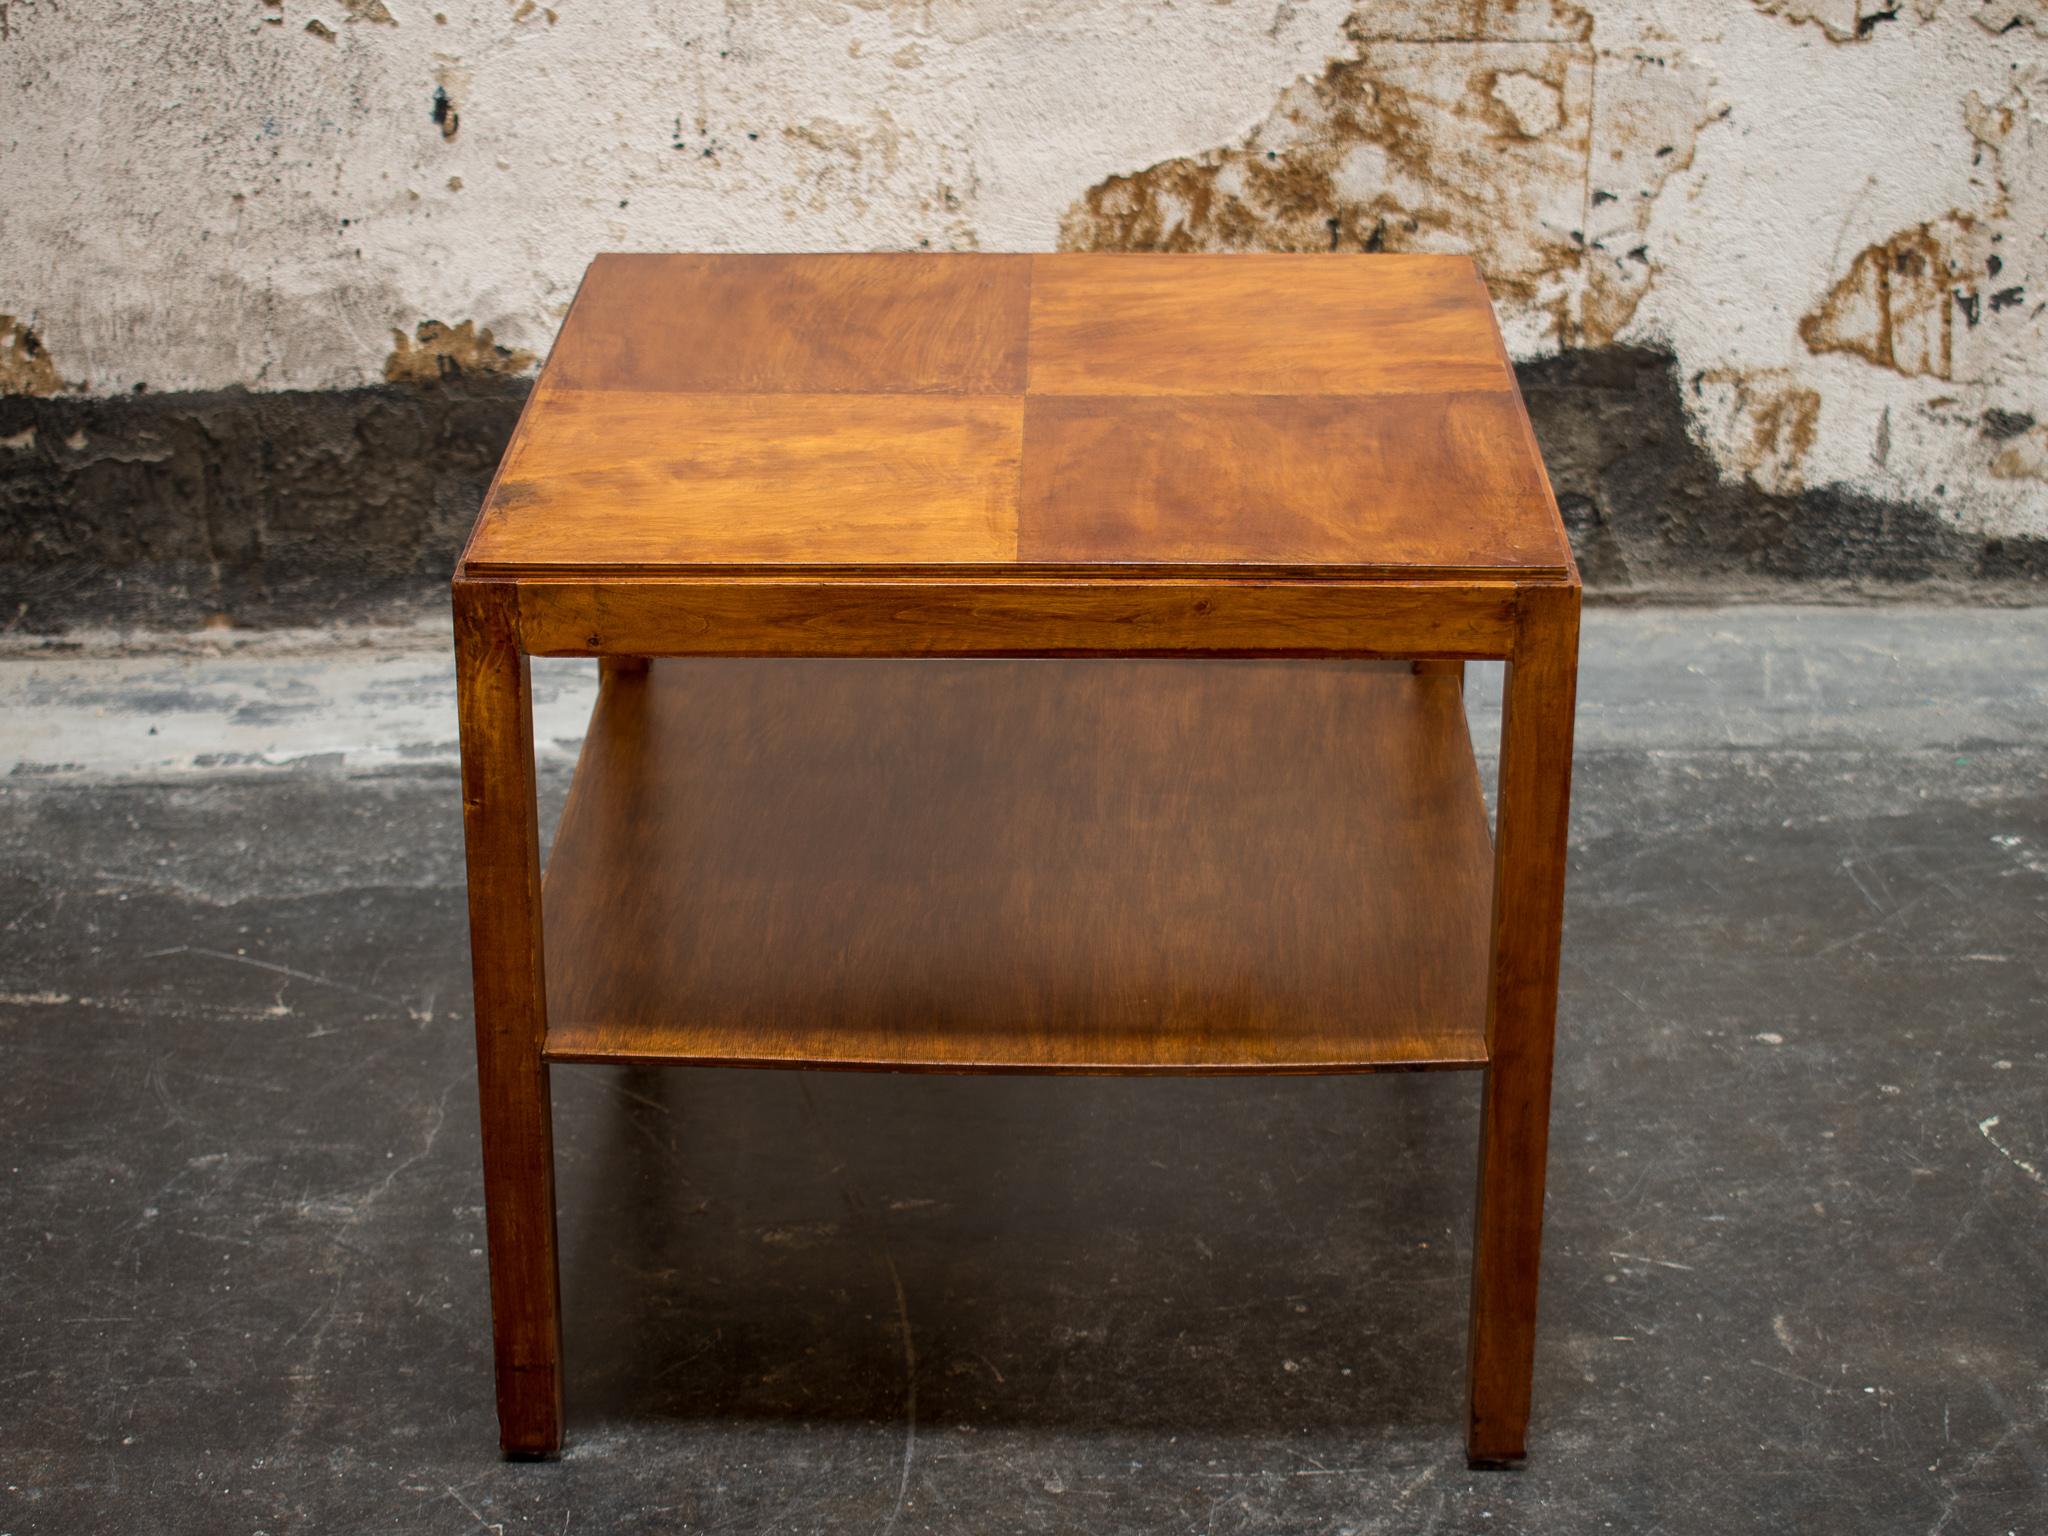 Swedish Art Deco Birch coffee or side table with parquetry top and lower shelf. This piece features a unique grain and finish that give the appearance of brush strokes.